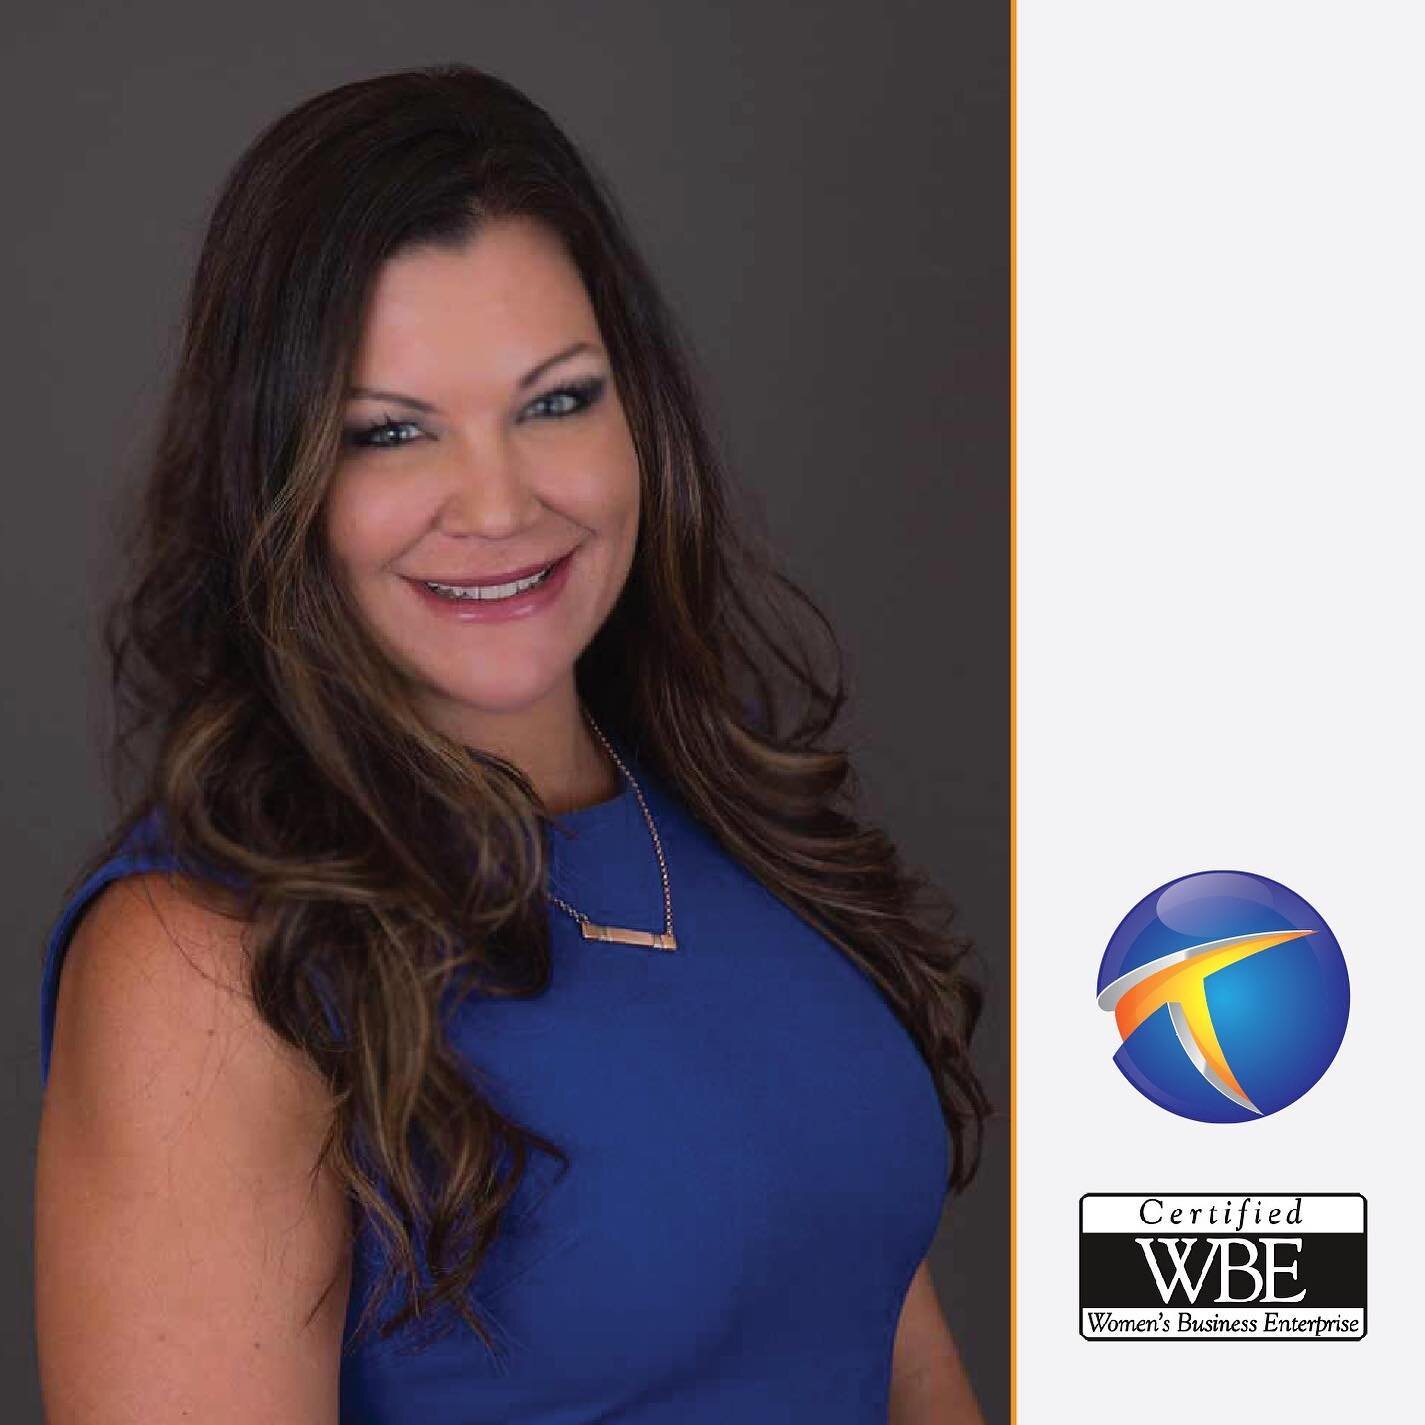 We&rsquo;re starting 2021 in a big way! 💥 

Transcom Solutions is proud to announce our certification as a Woman-Owned Business Enterprise (M/WBE) in the state of Florida. Sara Aguila, Founder and President, is thrilled to receive this certification